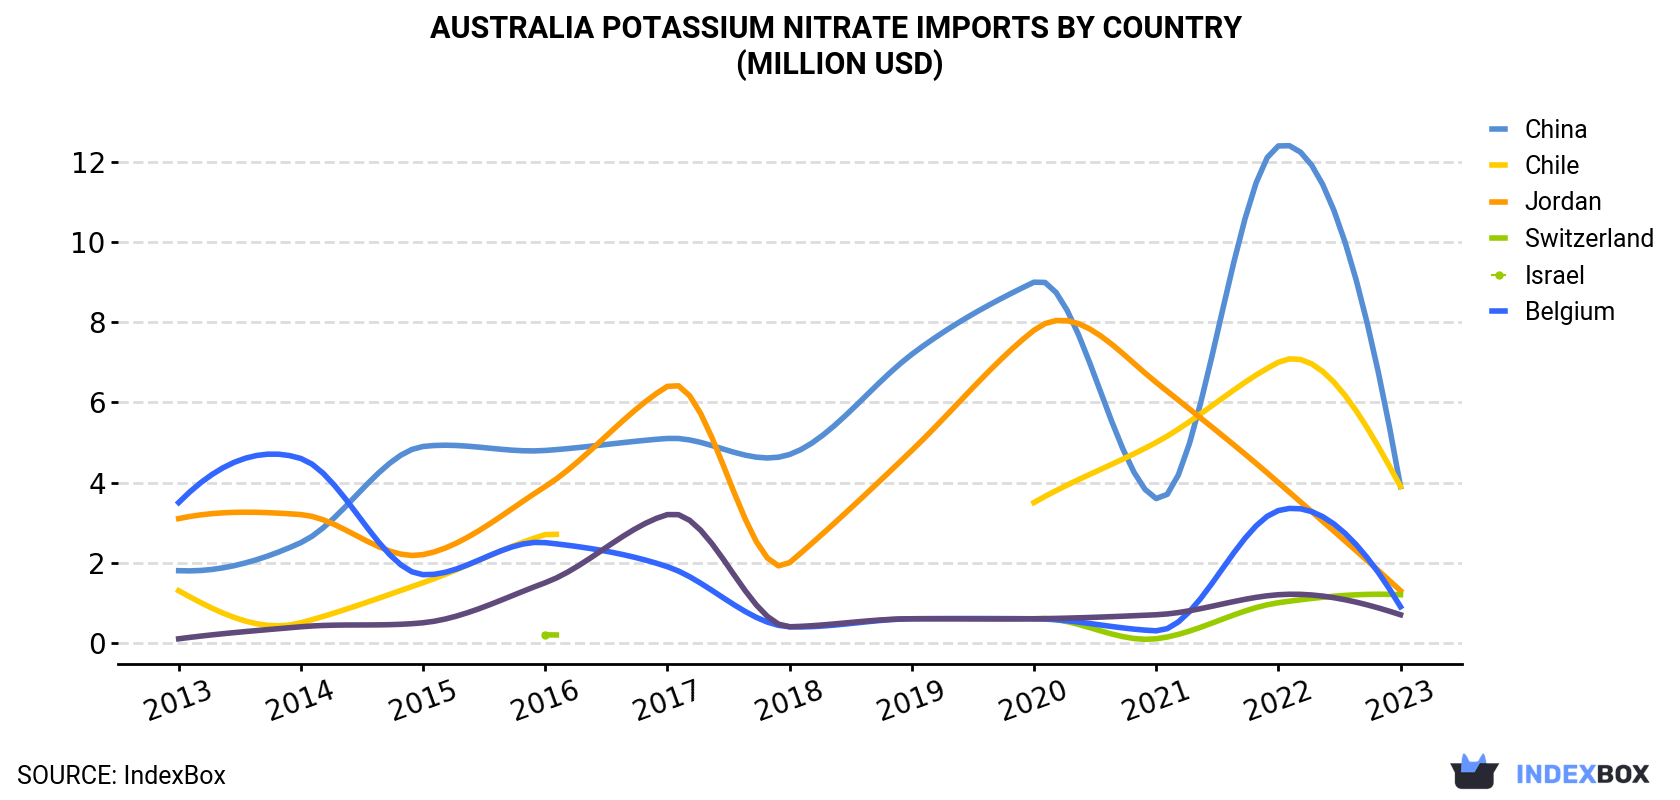 Australia Potassium Nitrate Imports By Country (Million USD)